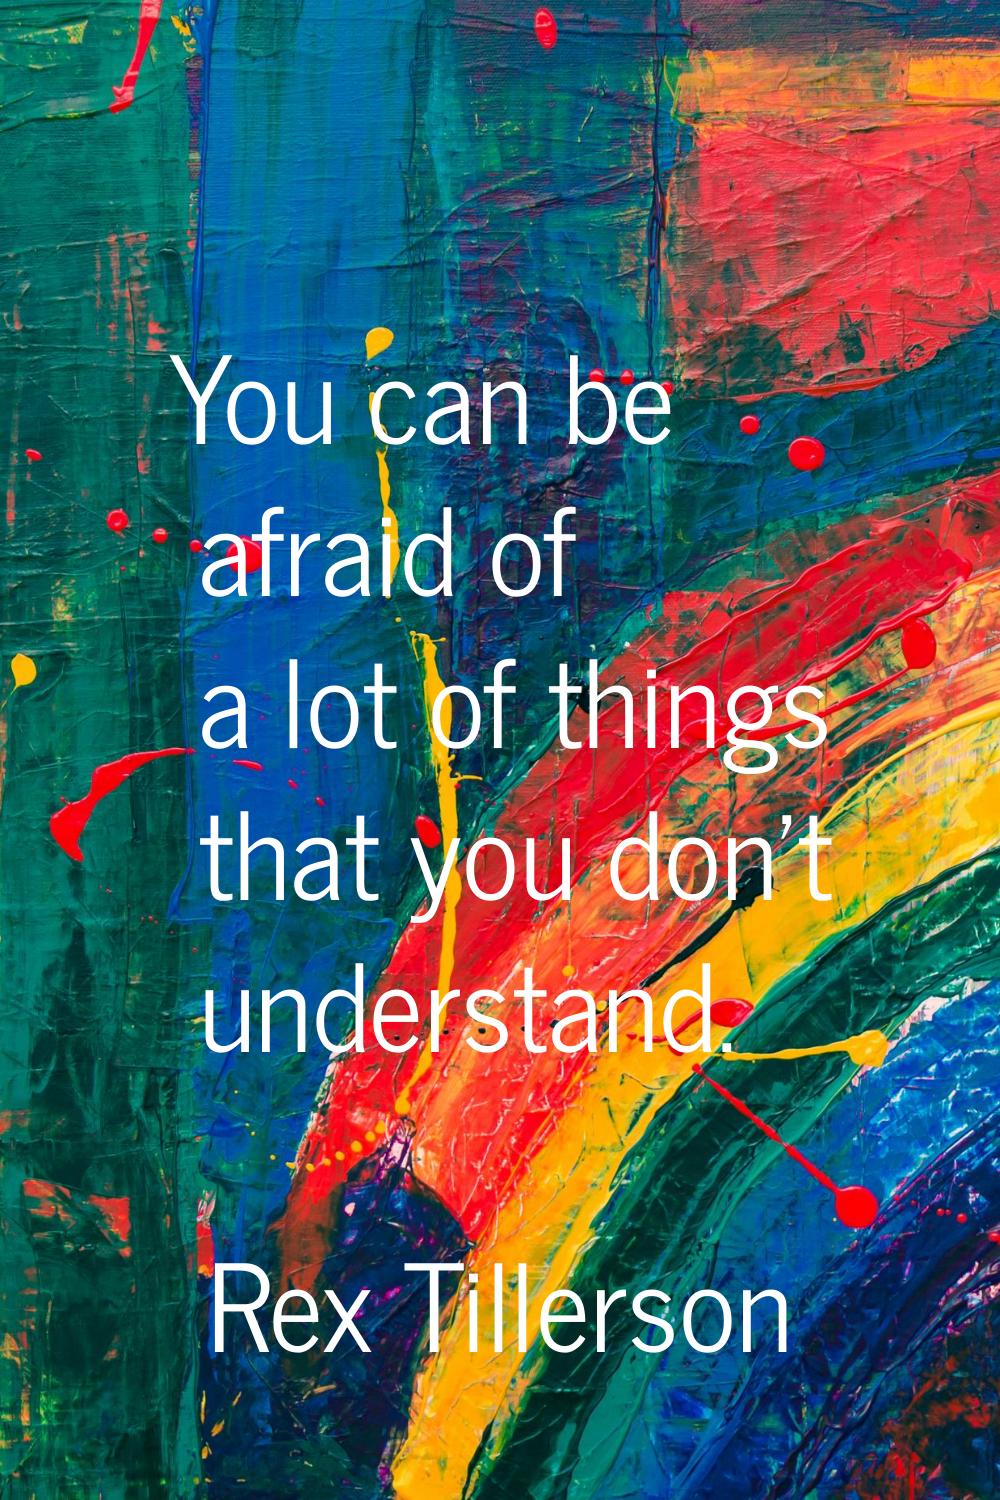 You can be afraid of a lot of things that you don't understand.